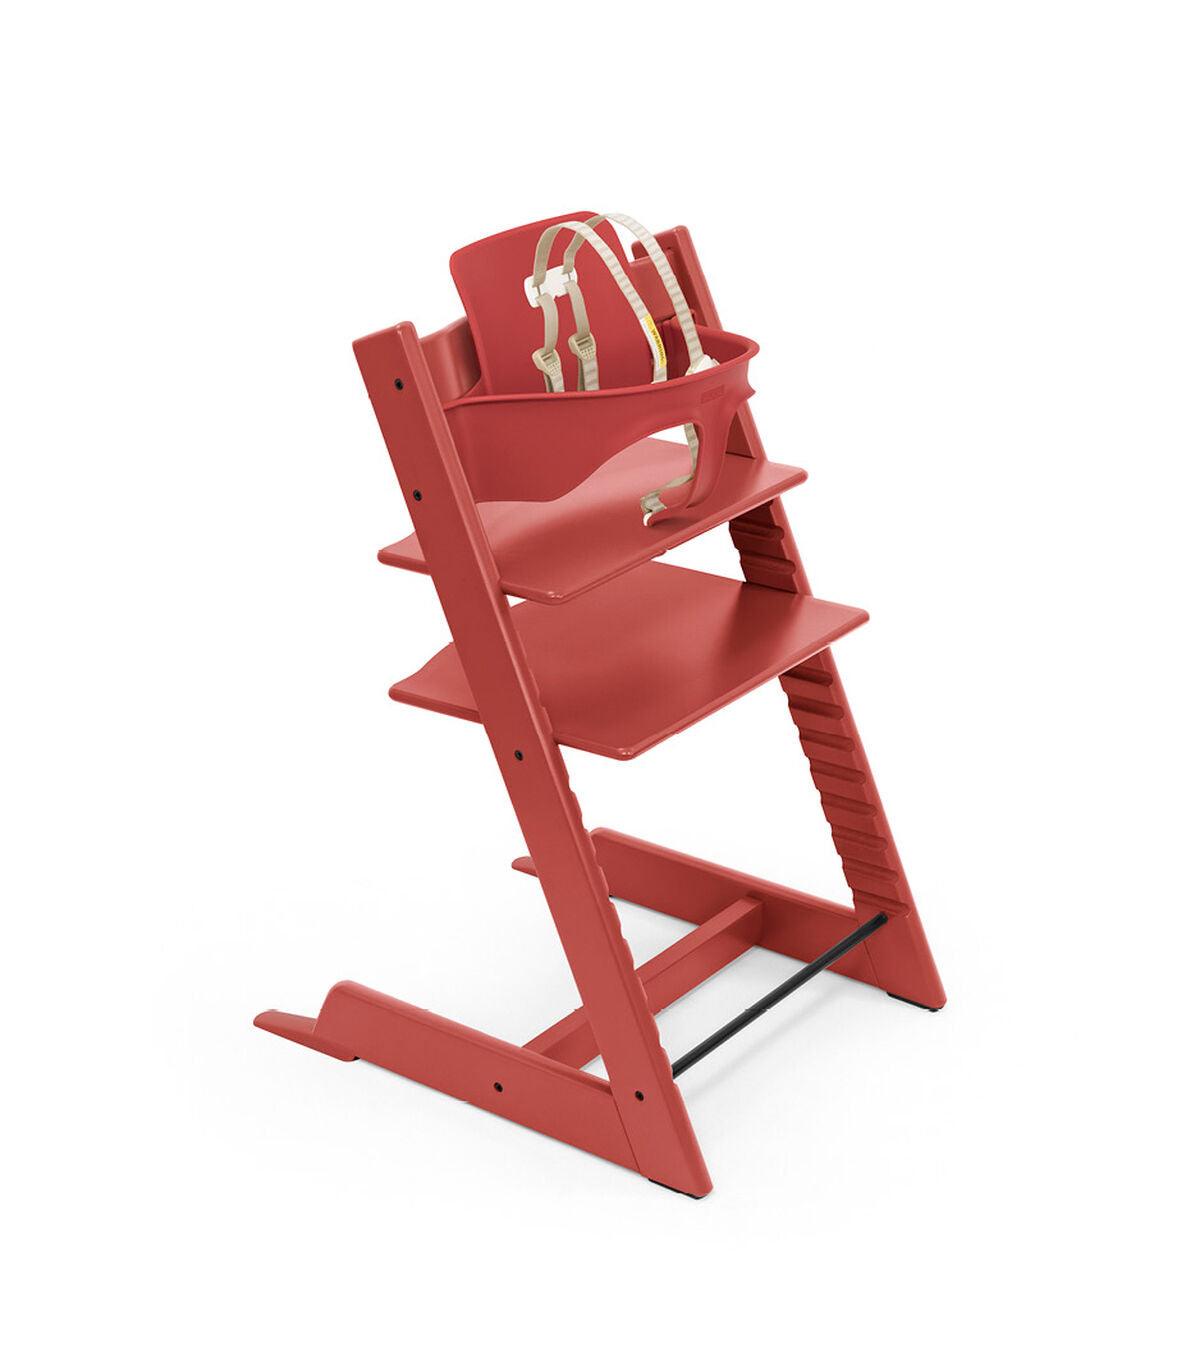 Stokke Tripp Trapp High Chair & Baby Set - Warm Red - Traveling Tikes 